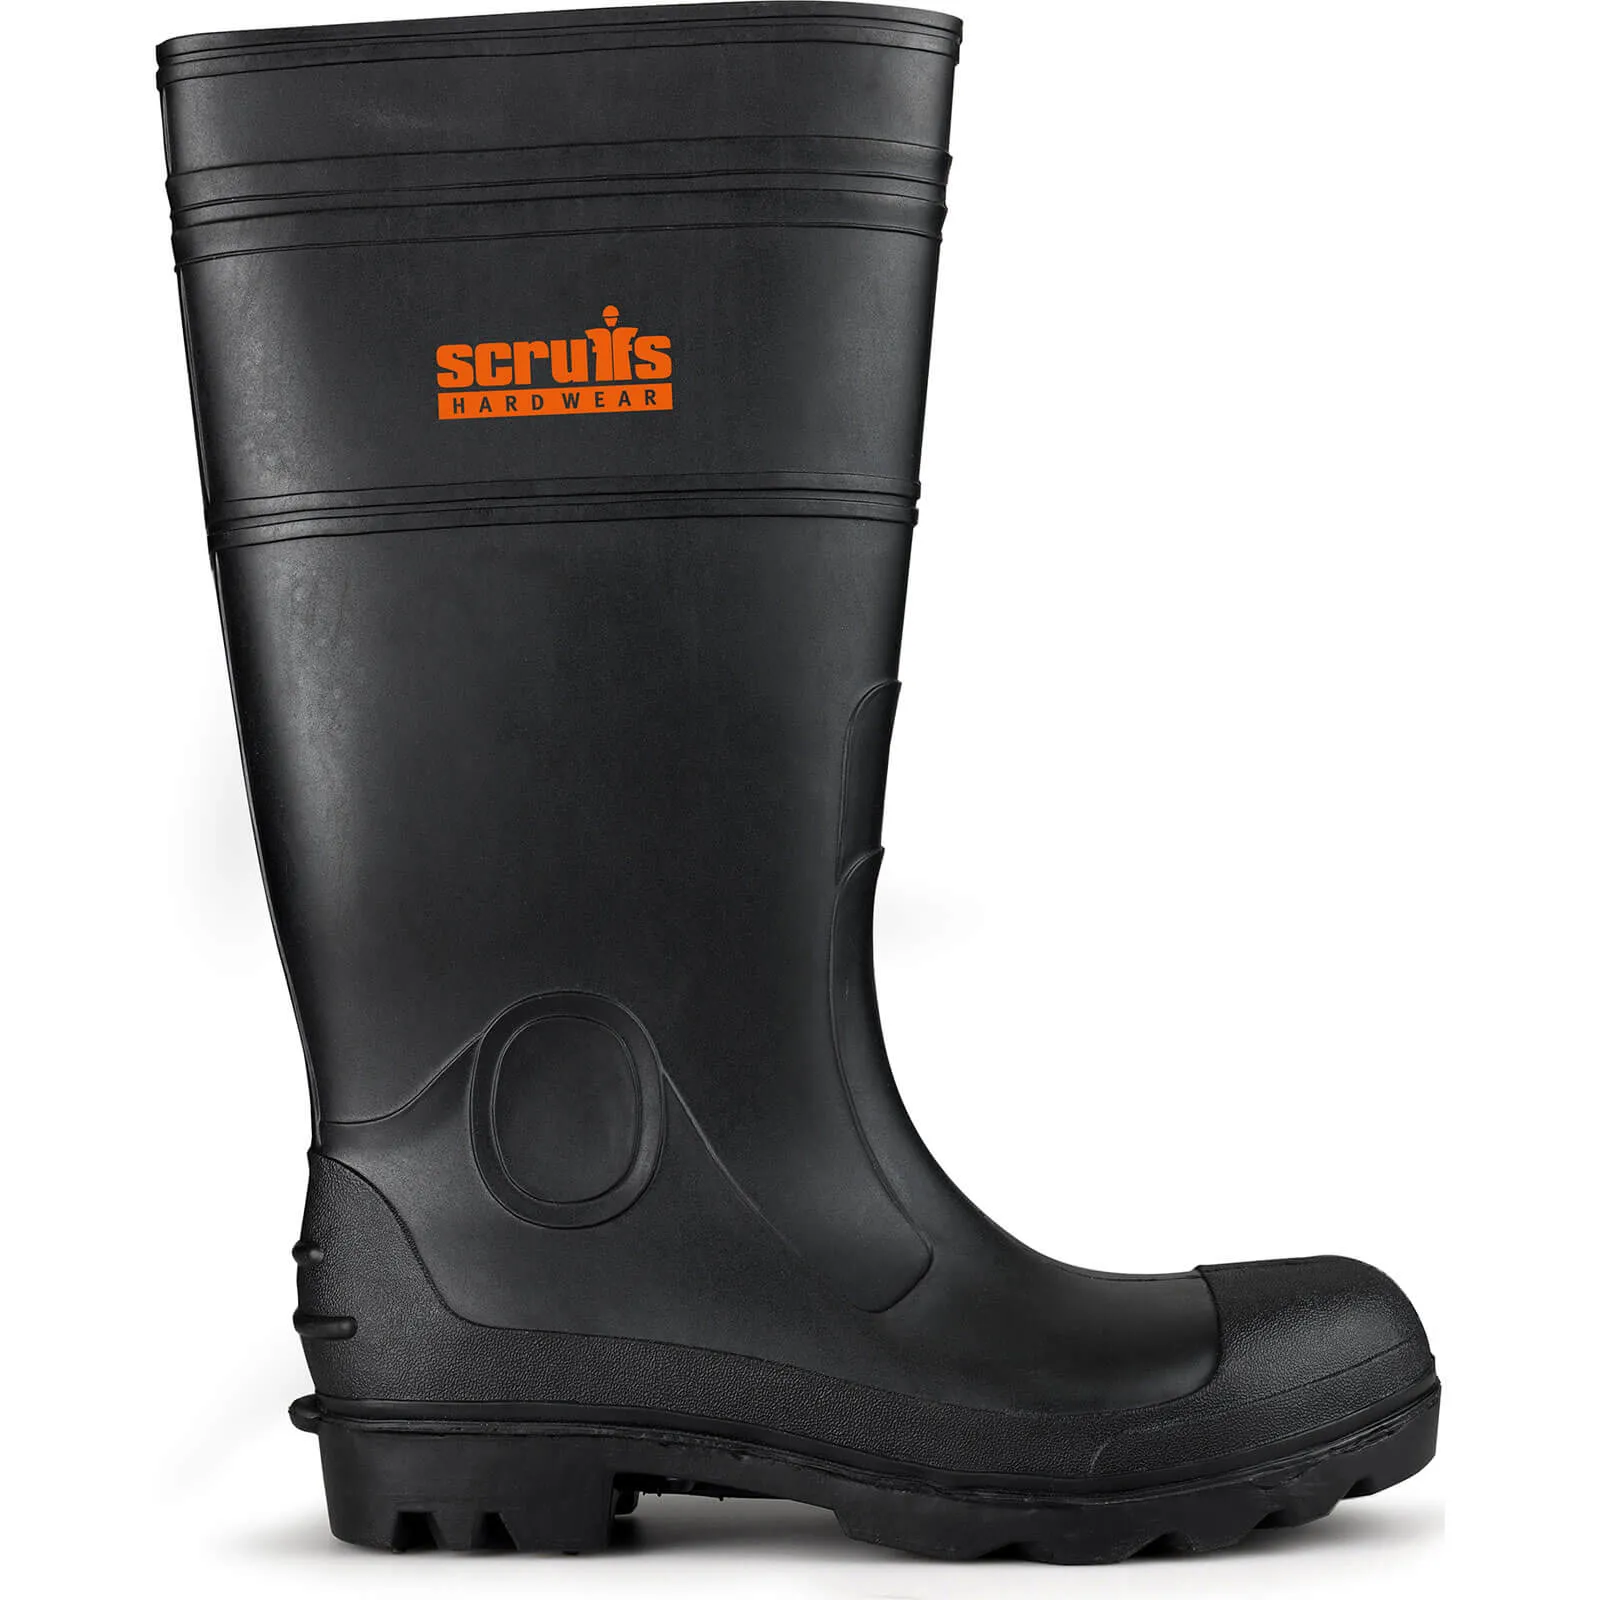 Scruffs Hayeswater Rigger Safety Boot - Black, Size 7